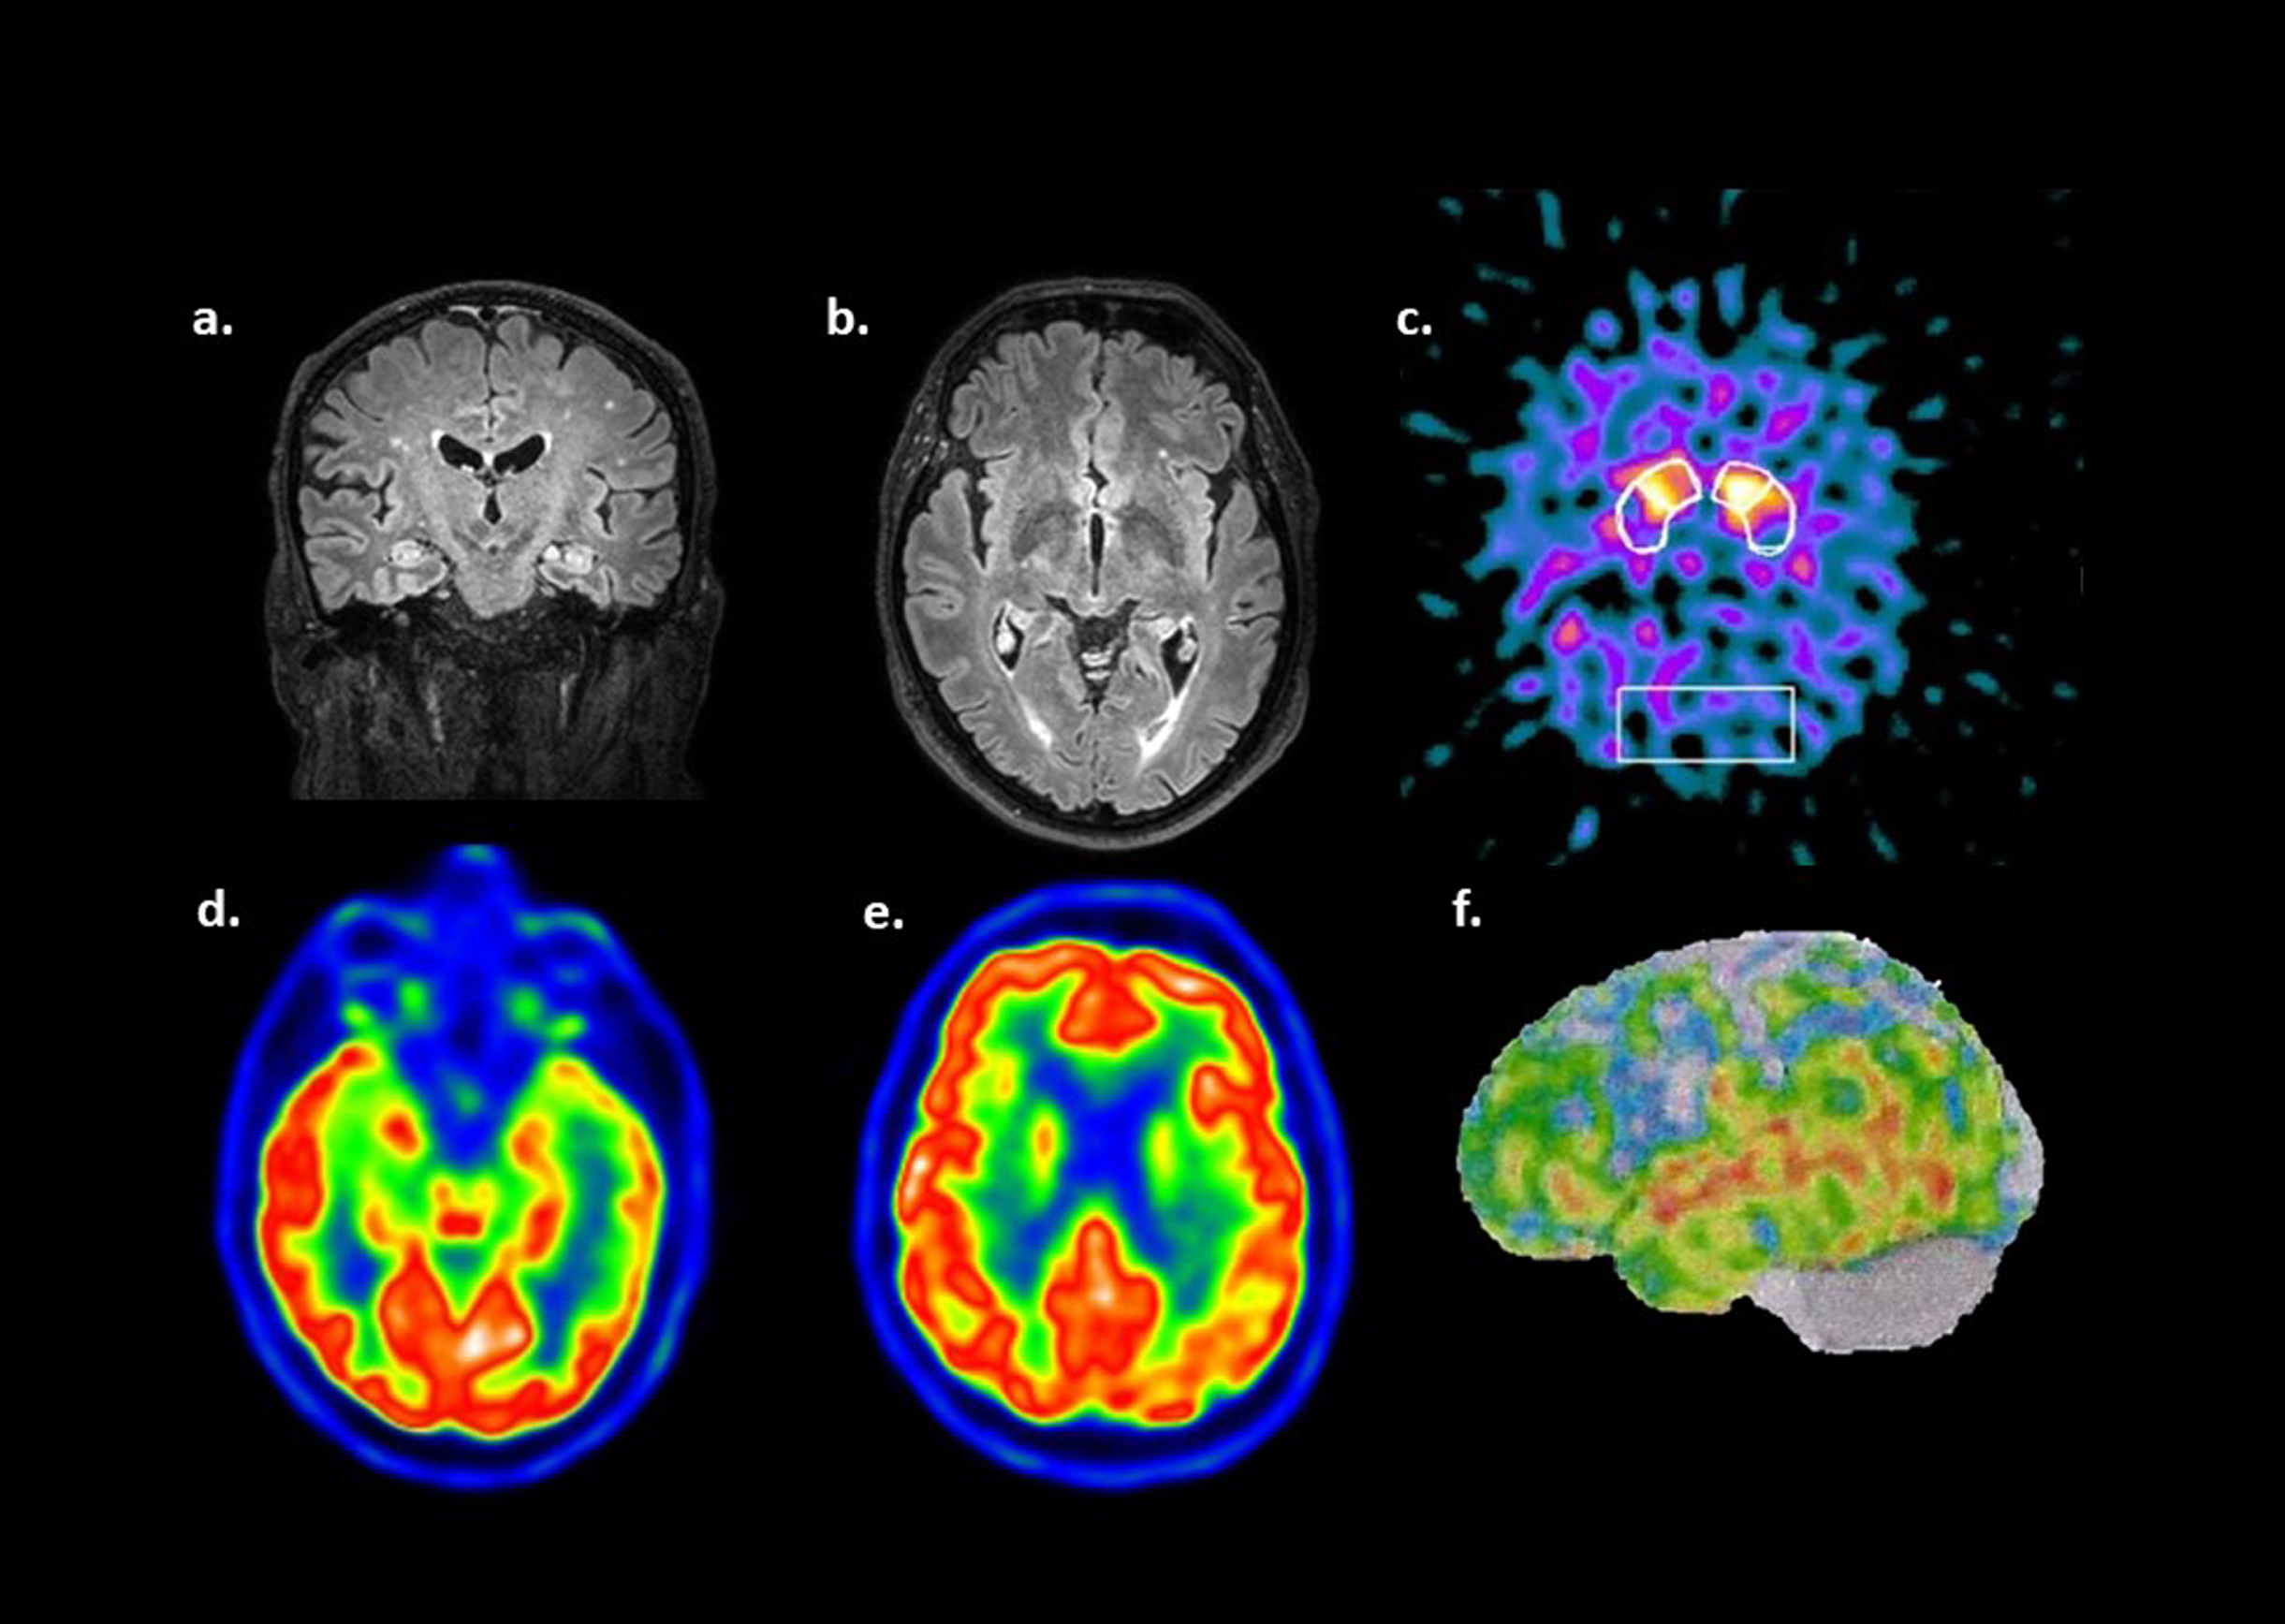 Cerebral MRI images (a, b). Fluid-attenuated inversion recovery (FLAIR) shows hyperintense lesions due to chronic small vessel disease, Fazekas Scale 1. Hippocampus and basal ganglia do not show abnormalities. 123I-FP-CIT dopamine transporter SPECT (c) revealed an inhomogeneous presynaptic dopamine transporter reduction in the putamen and caudates, with left-side and right-side predominance respectively. 18F-FDG PET imaging (d, e) demonstrated hypometabolism in both parietal lobes, most prominently on the left, and in the left lateral temporal area. [18F] Flutemetamol Amyloid PET showed predominant Aβ amyloid accumulation in the left temporal region (f).